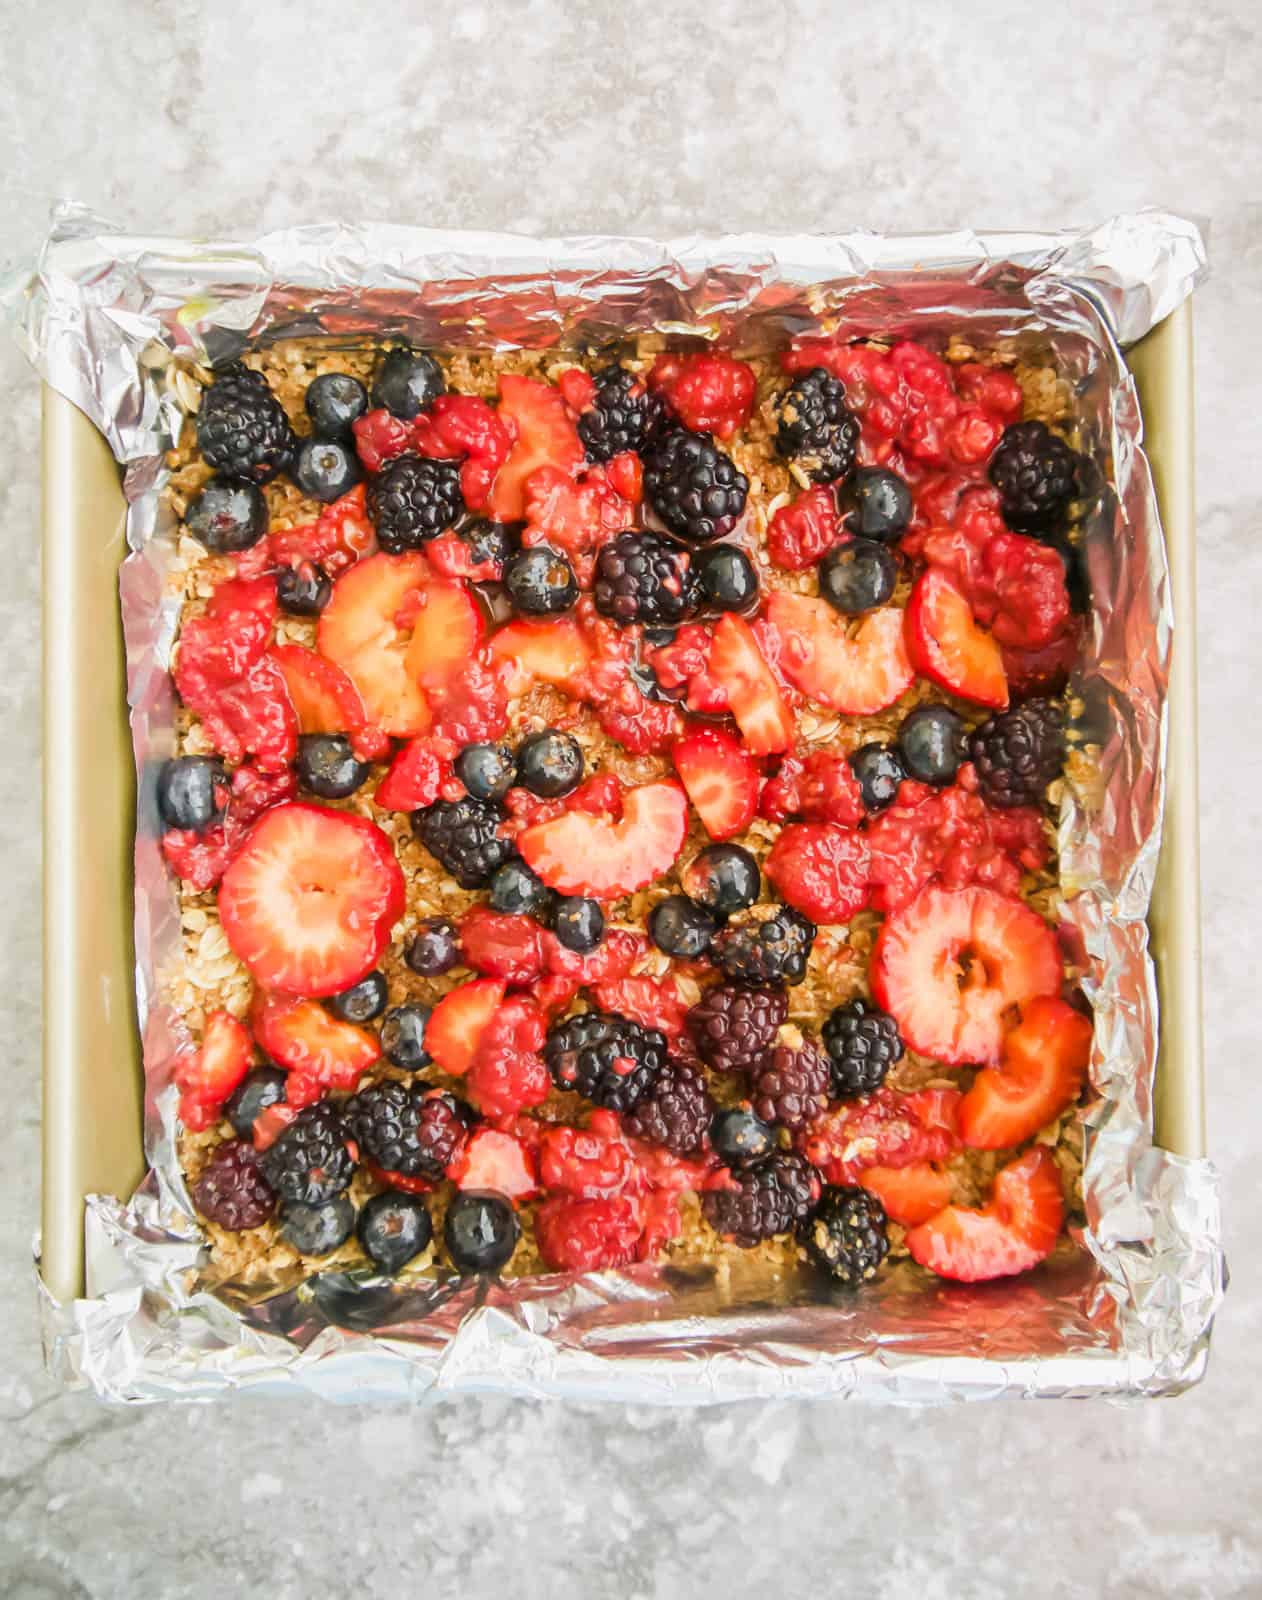 Fruit layer added to the oat layer in a pan.